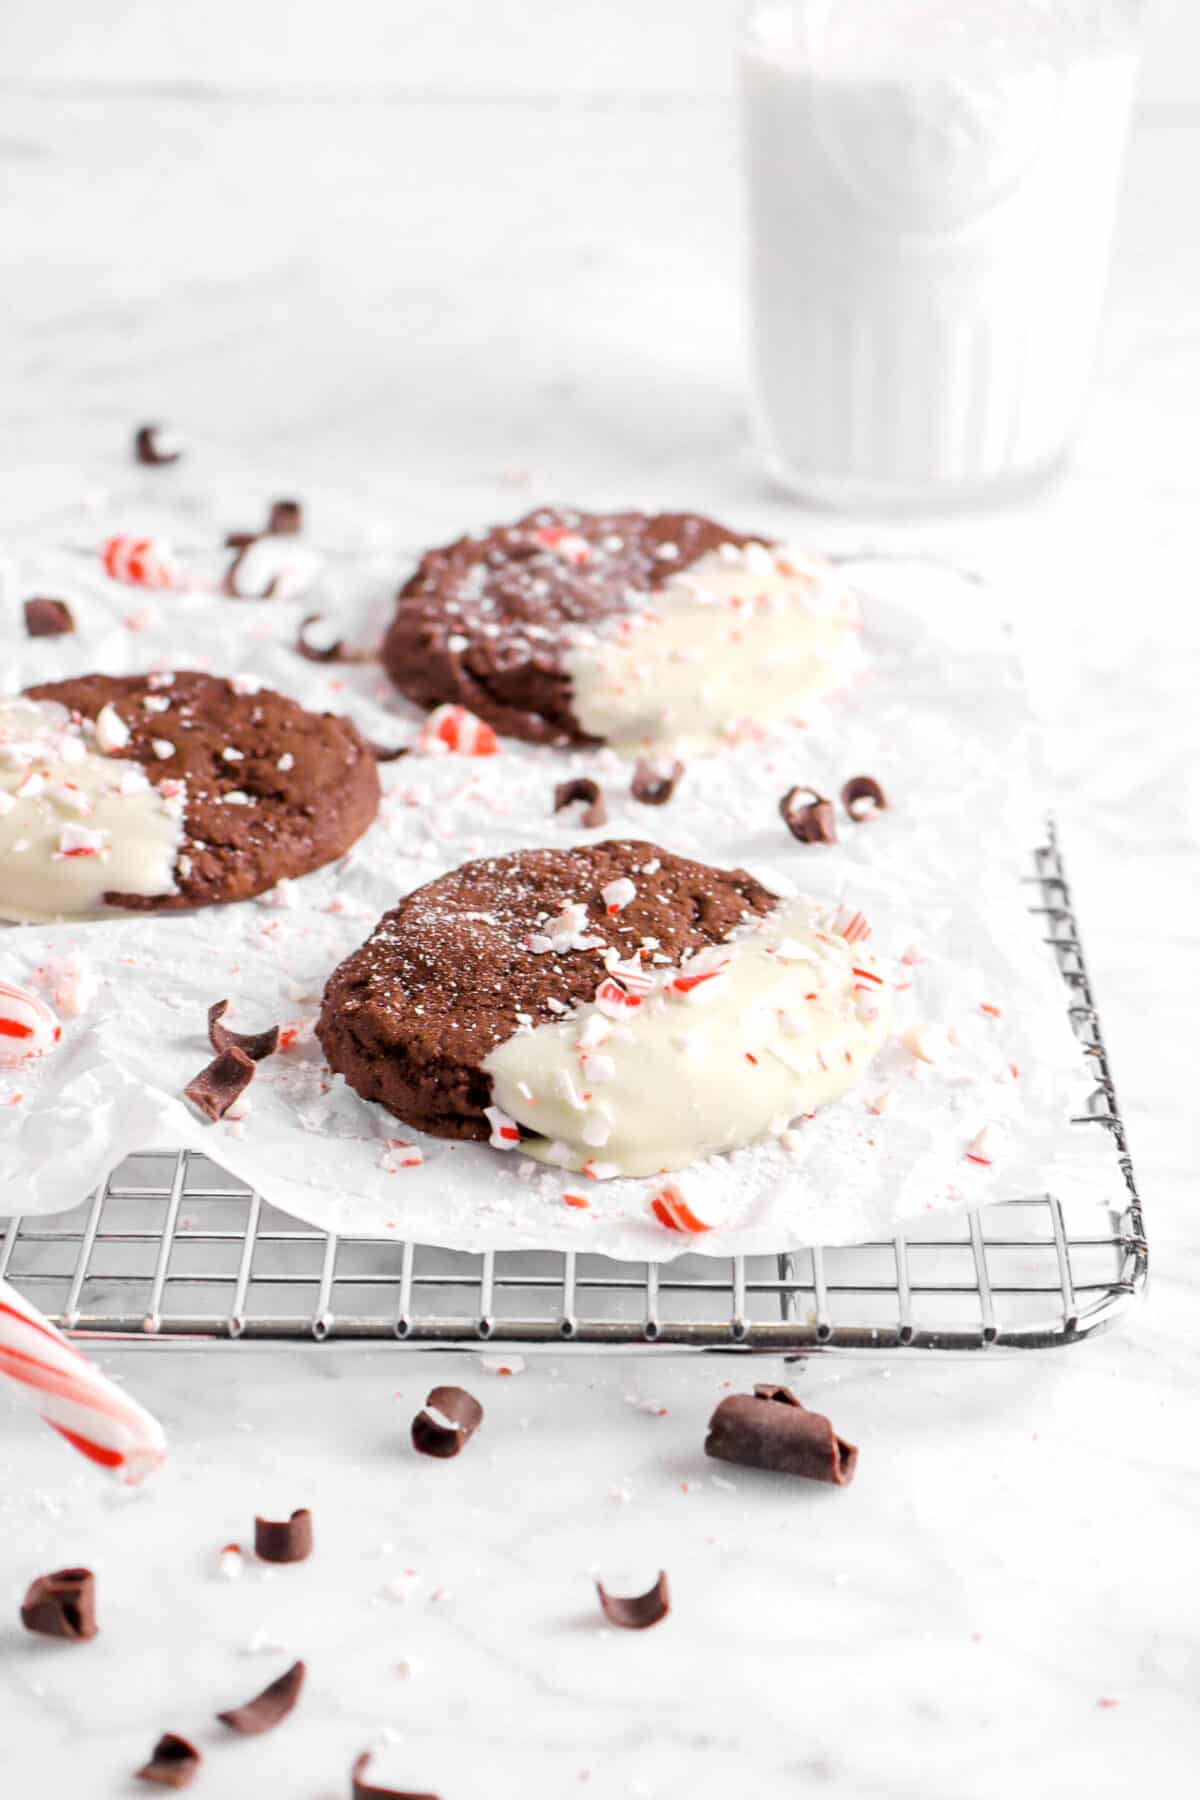 three chocolate peppermint cookies on wire cooling rack with glass of milk behind, chocolate curls, and crushed peppmint